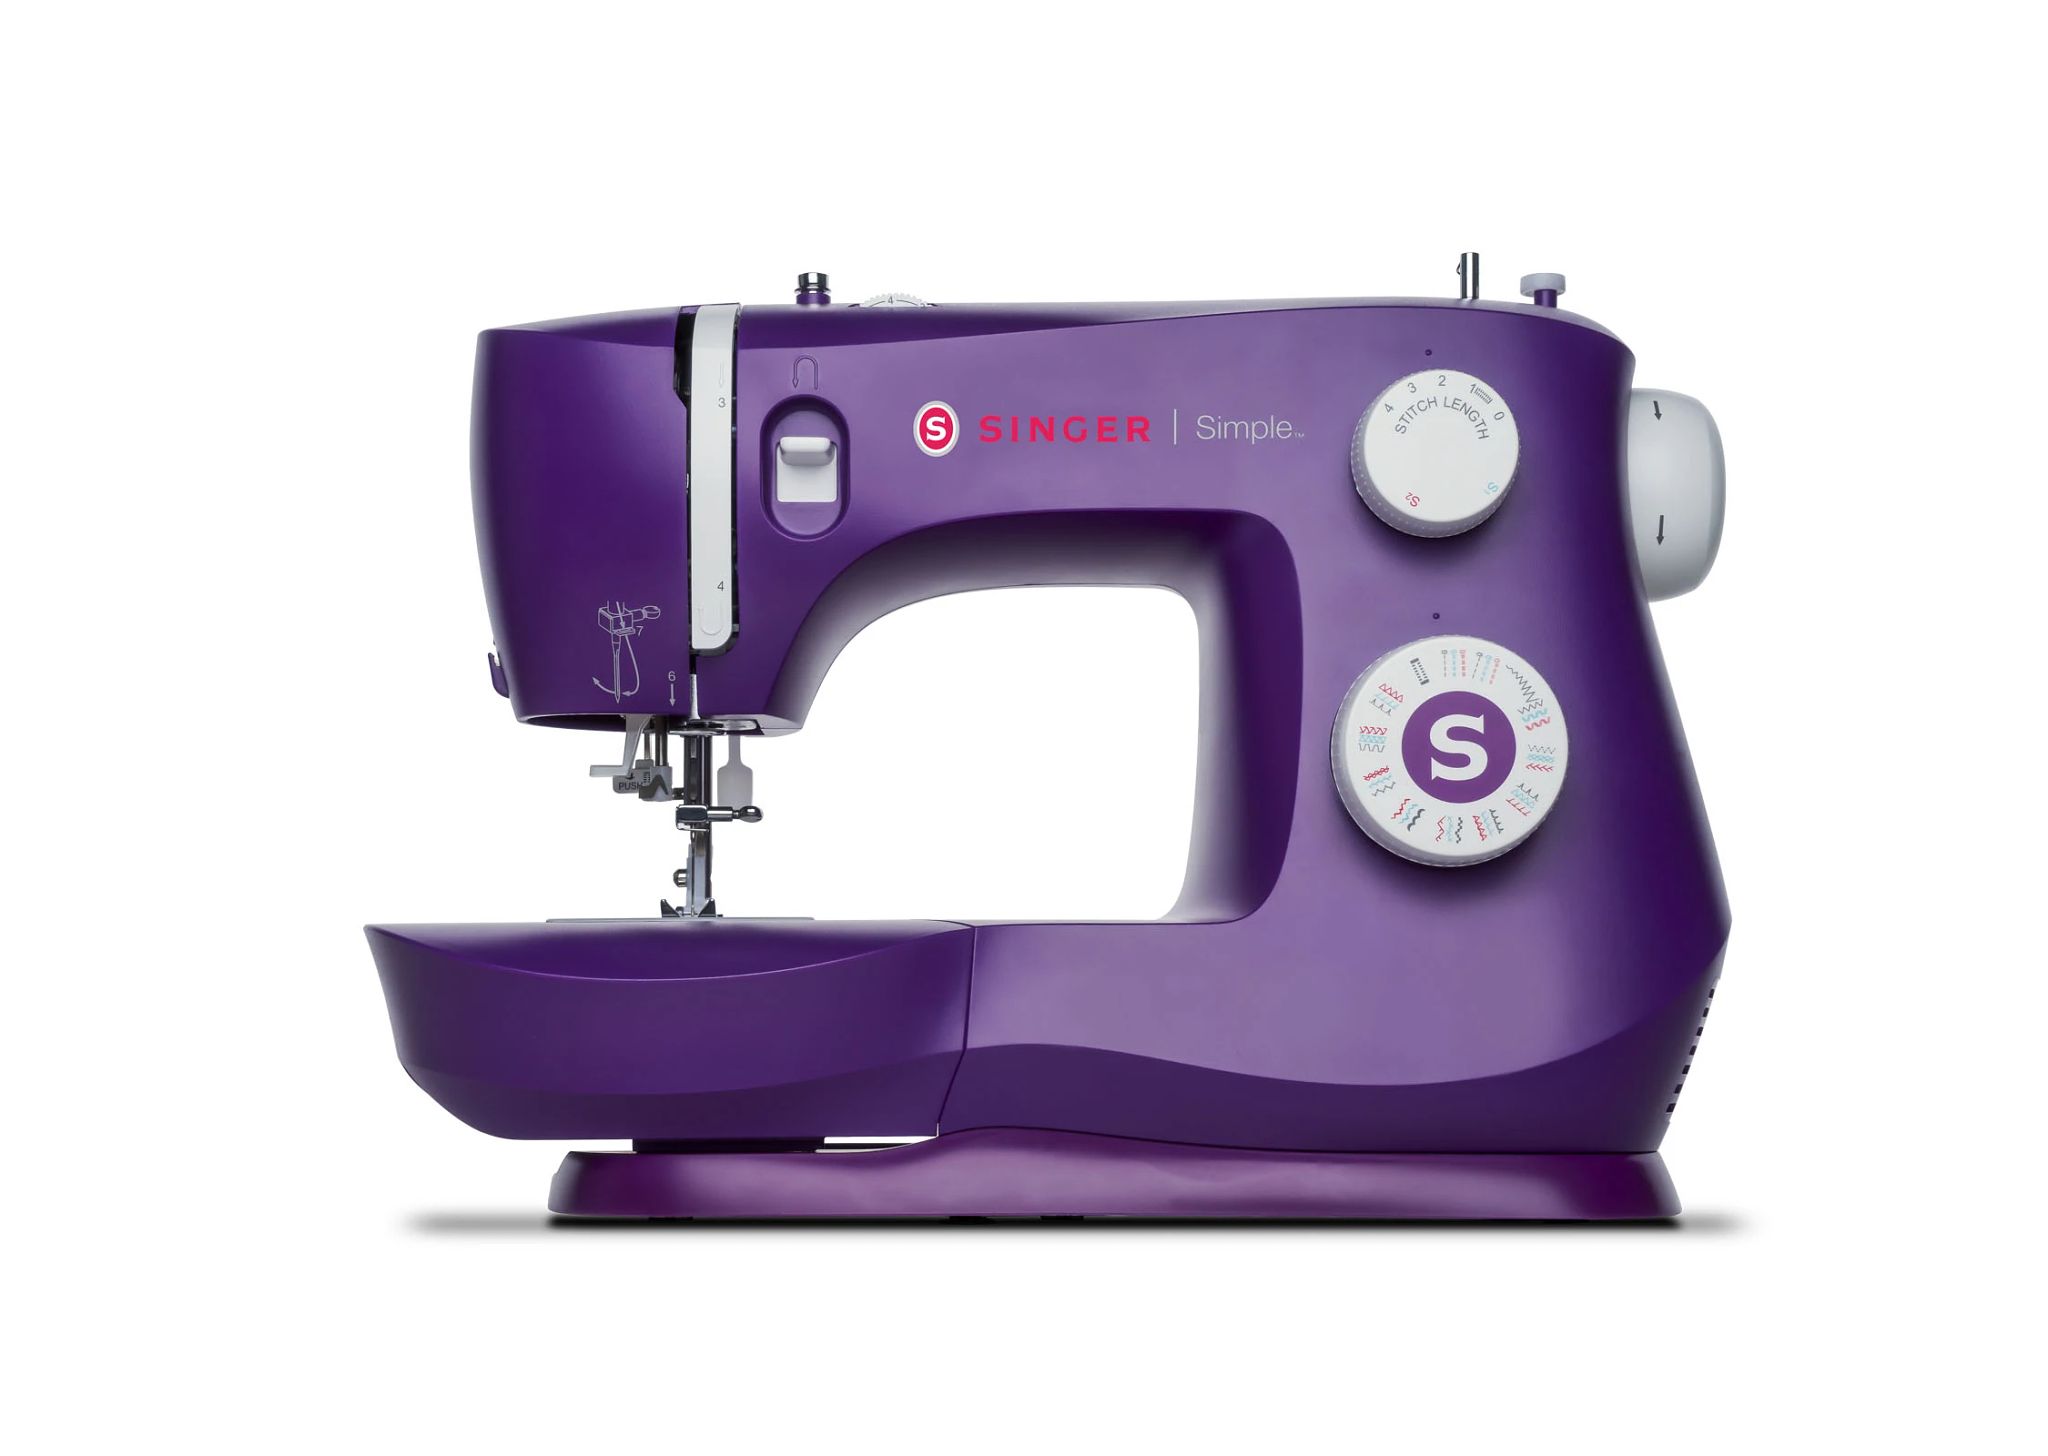 SINGER® Simple™ 3337 Mechanical Sewing Machine, Red 